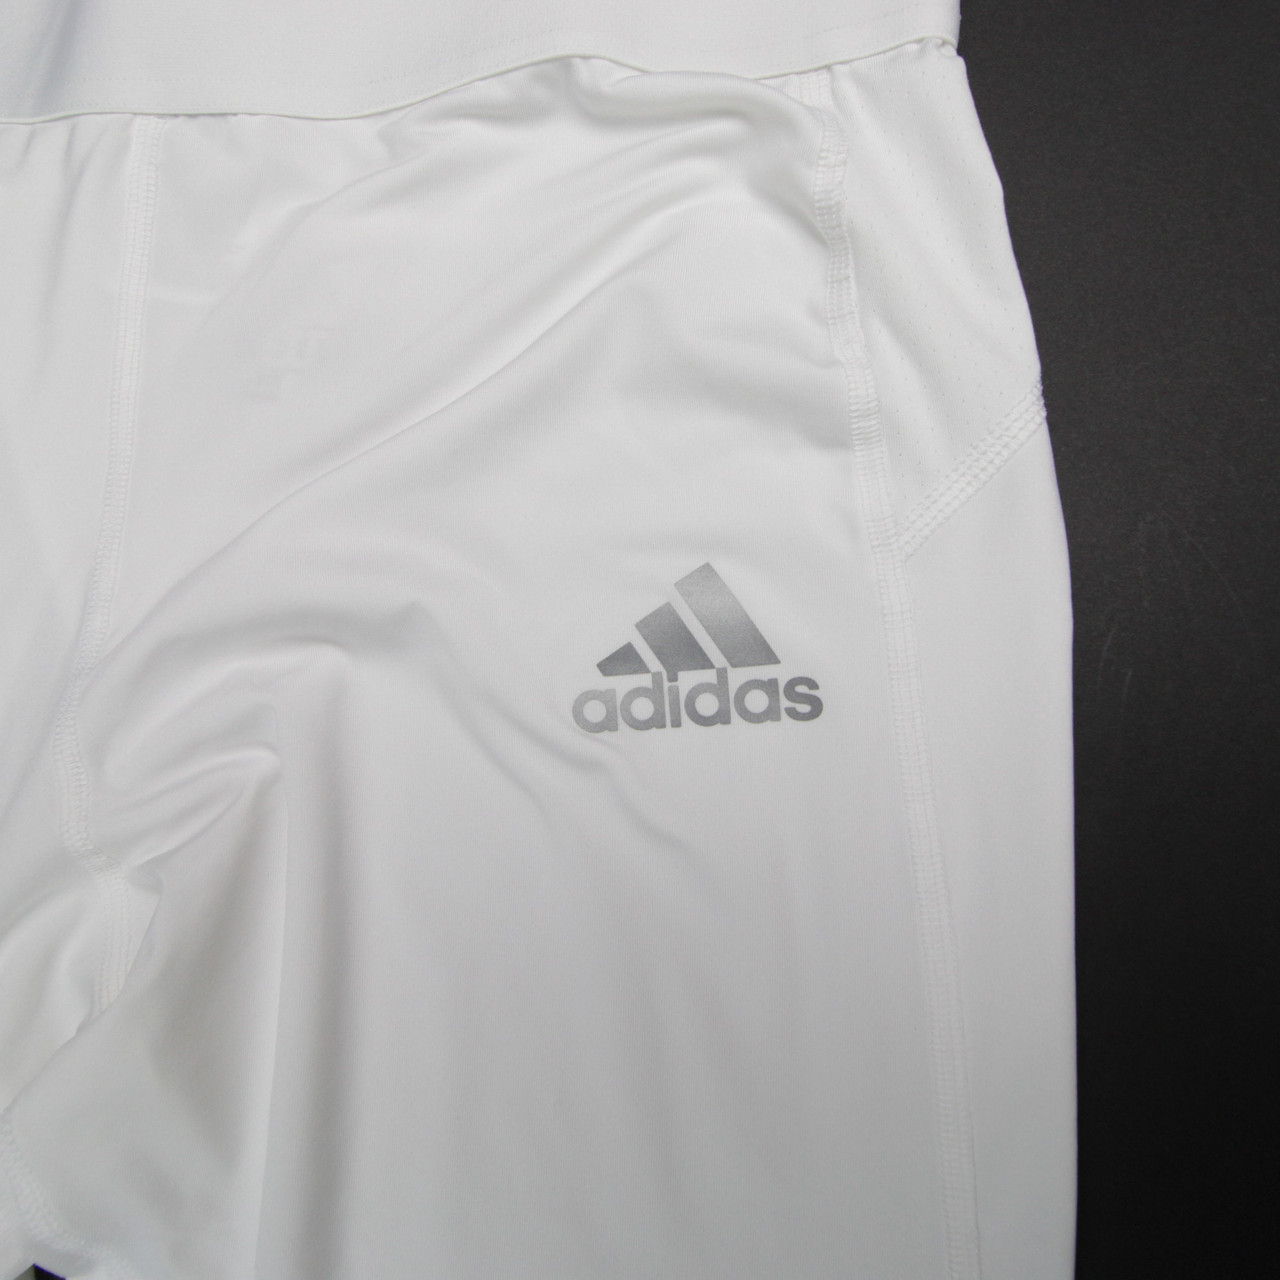 adidas Techfit Compression Pants Women's White Used XL 378